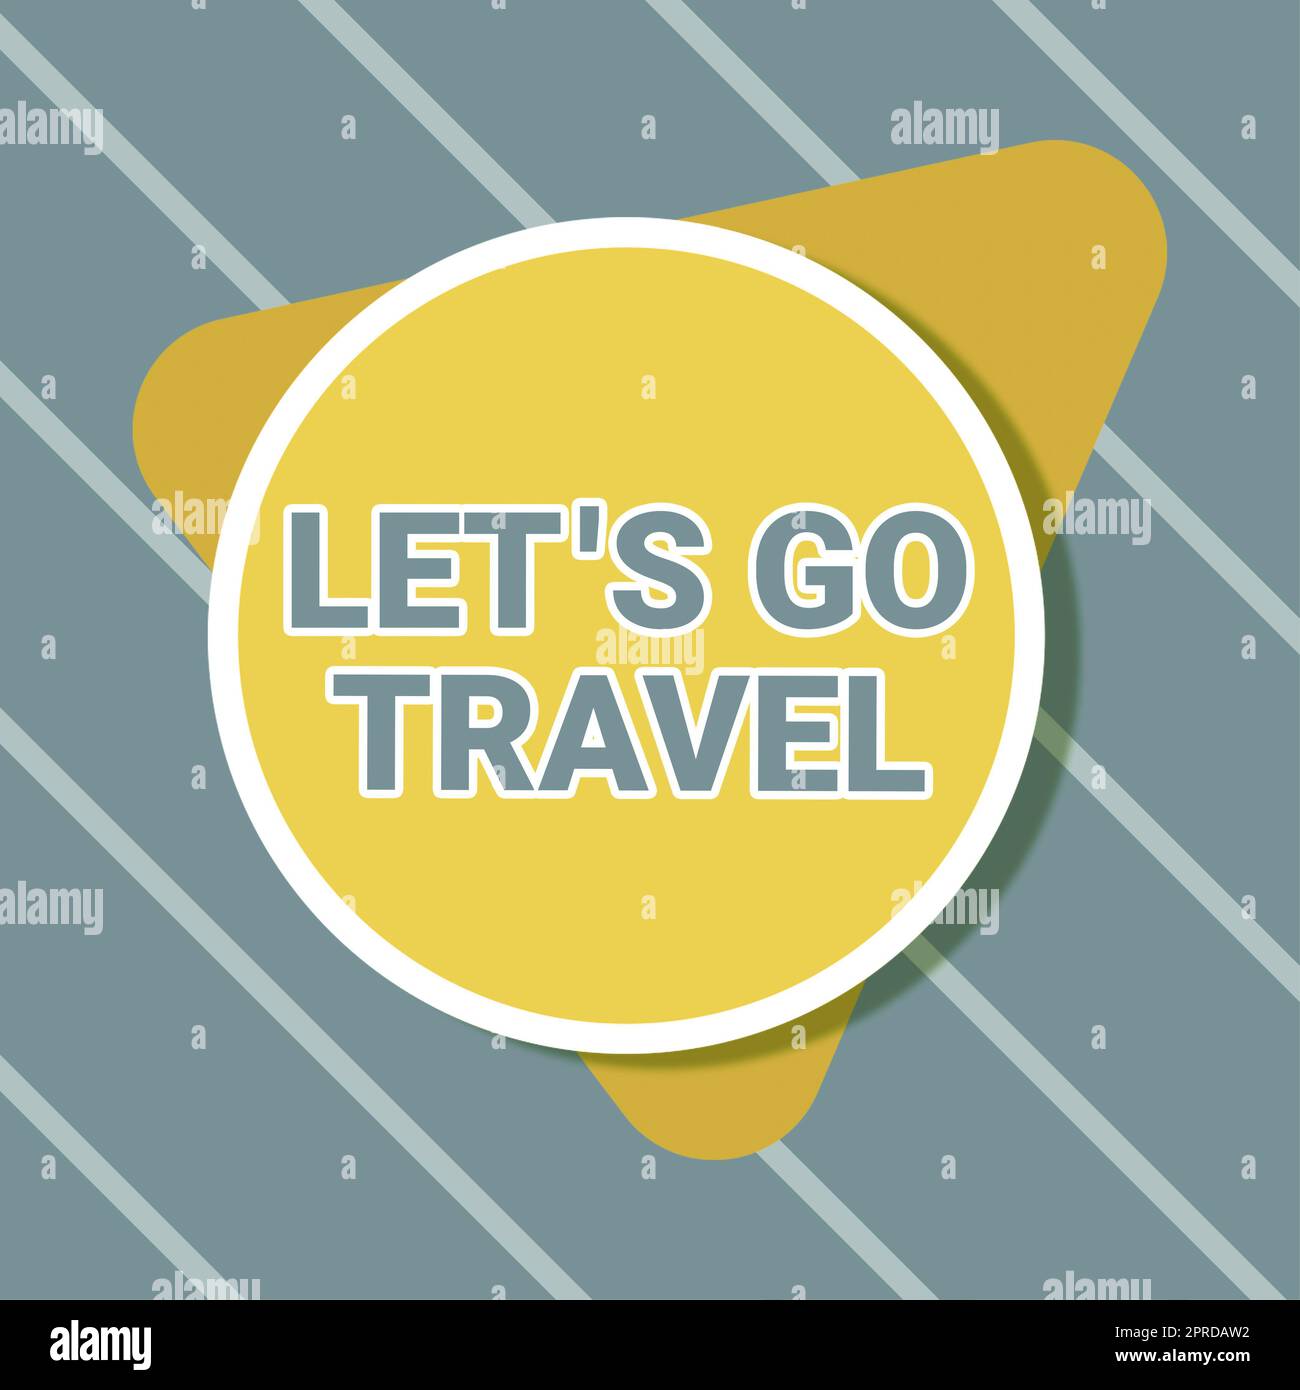 Hand writing sign Let S Is Go Travel. Business approach Plan a trip visit new places countries cities adventure Blank Circular And Triangle Shapes For Promotion Of Business. Stock Photo